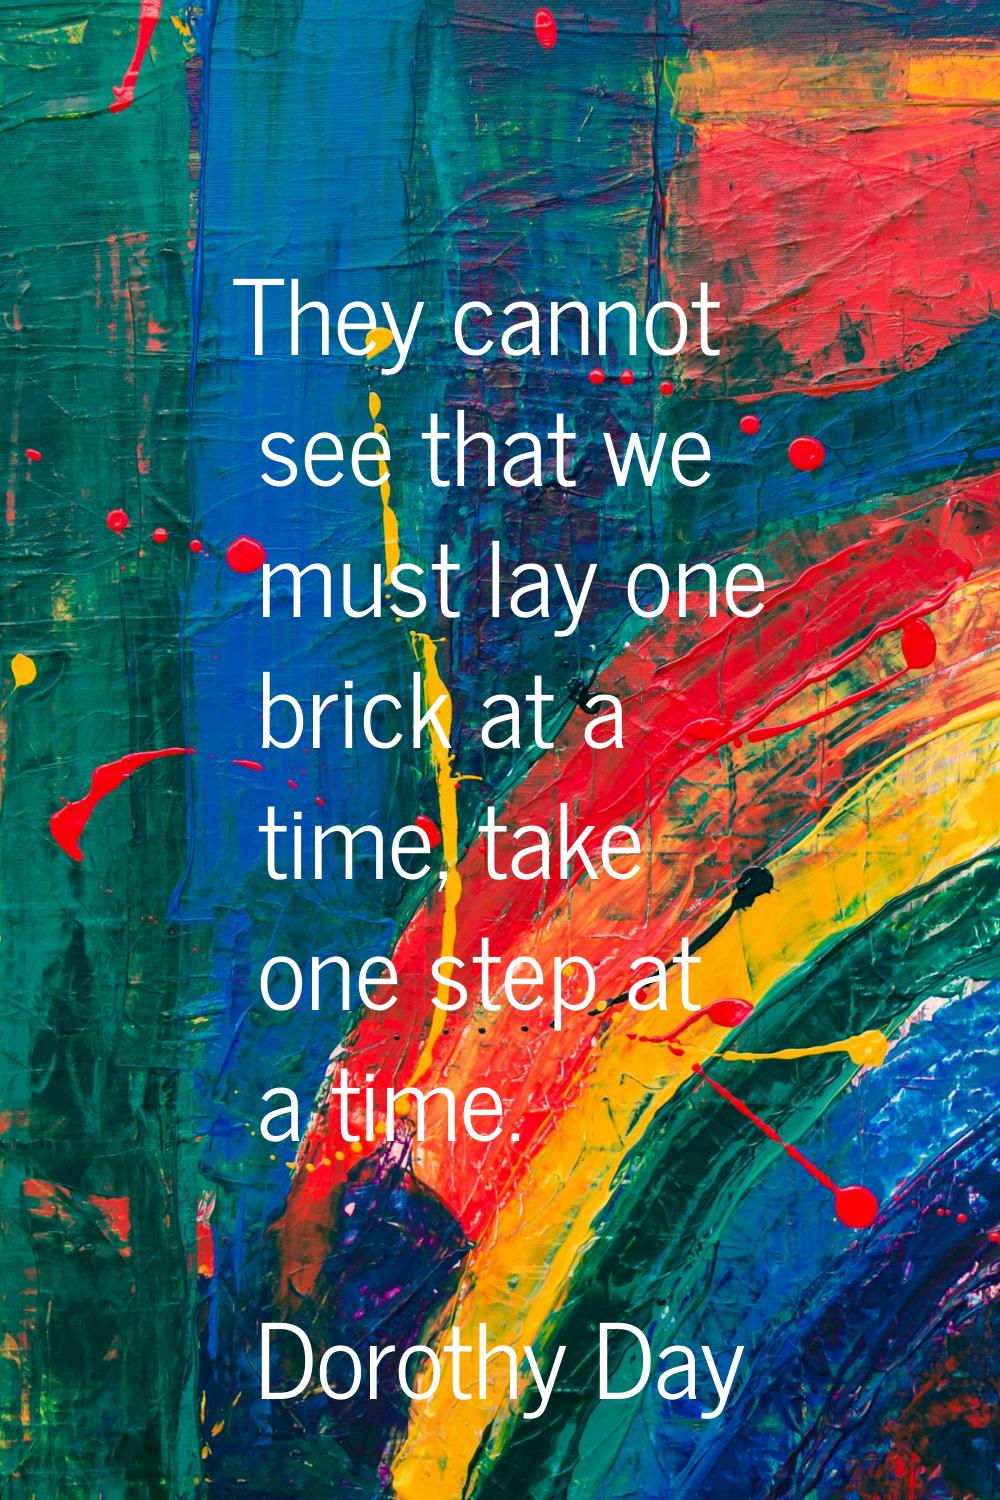 They cannot see that we must lay one brick at a time, take one step at a time.